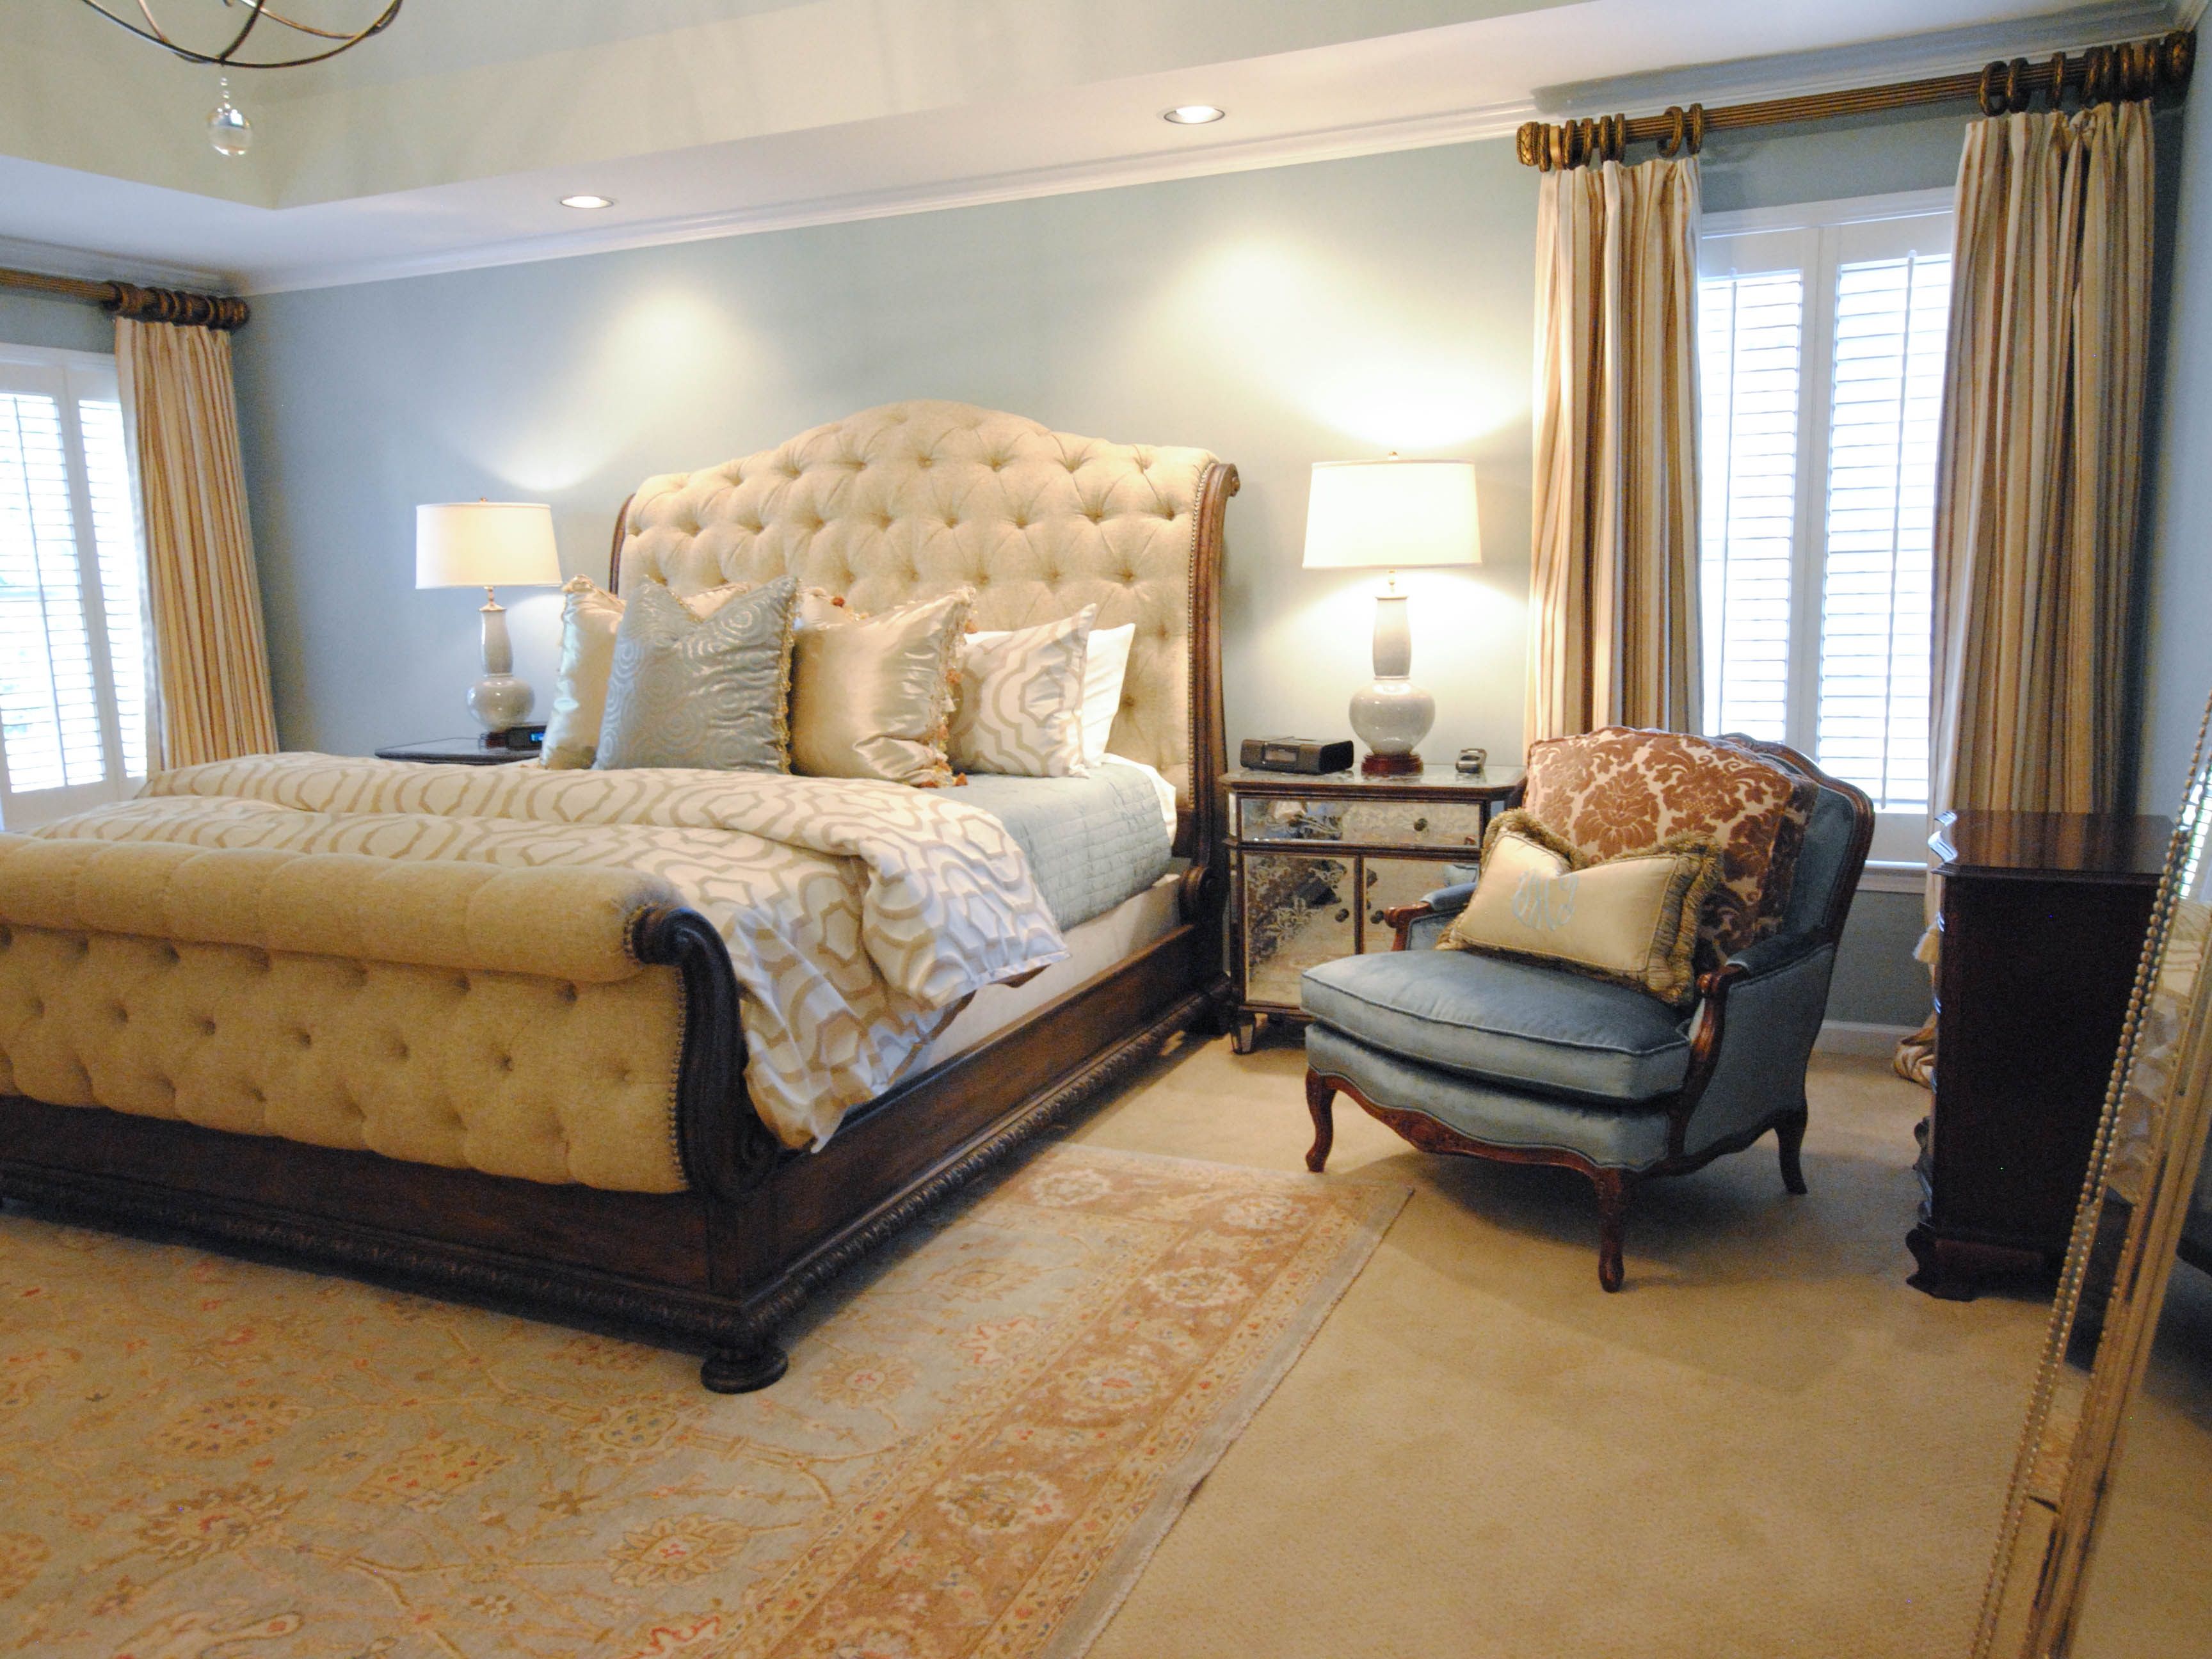 Upholstered Sleigh Bed For Classic Master Bedroom Interior (View 27 of 28)